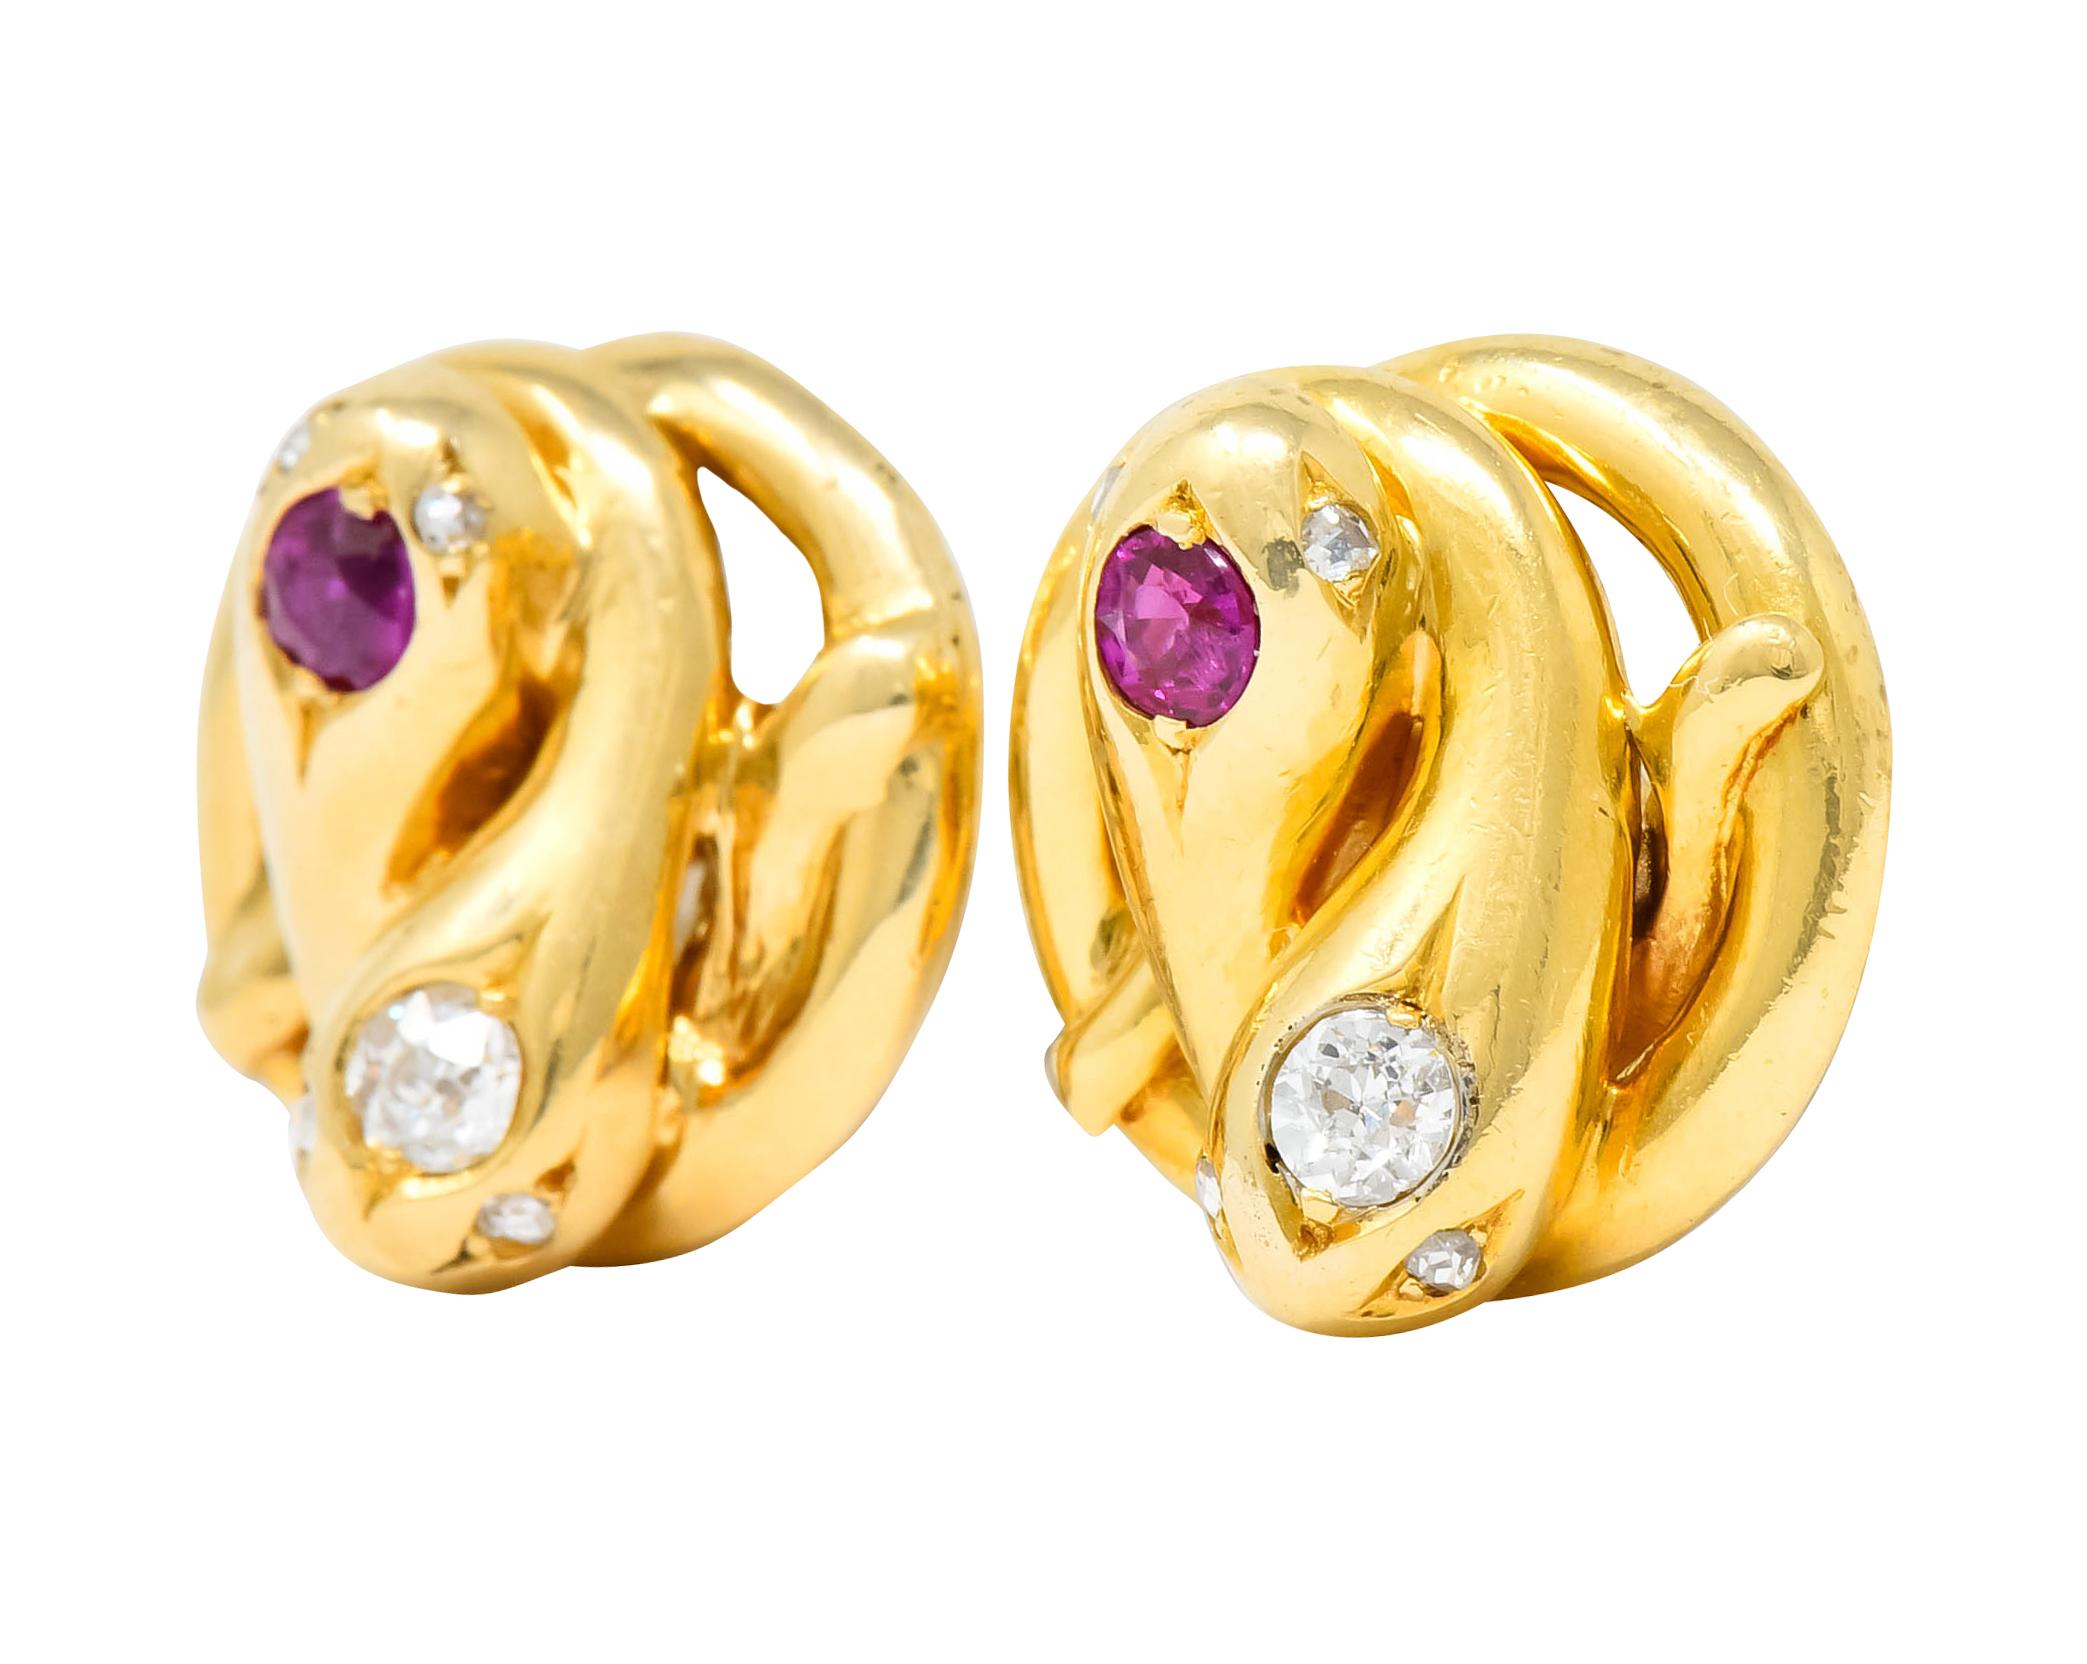 Victorian earrings converted to studs and designed as two intertwined snakes accented by rose cut diamond eyes

One snake on each earring is bead set with a round cut ruby weighing approximately 0.26 carat total, transparent and violetish-red in